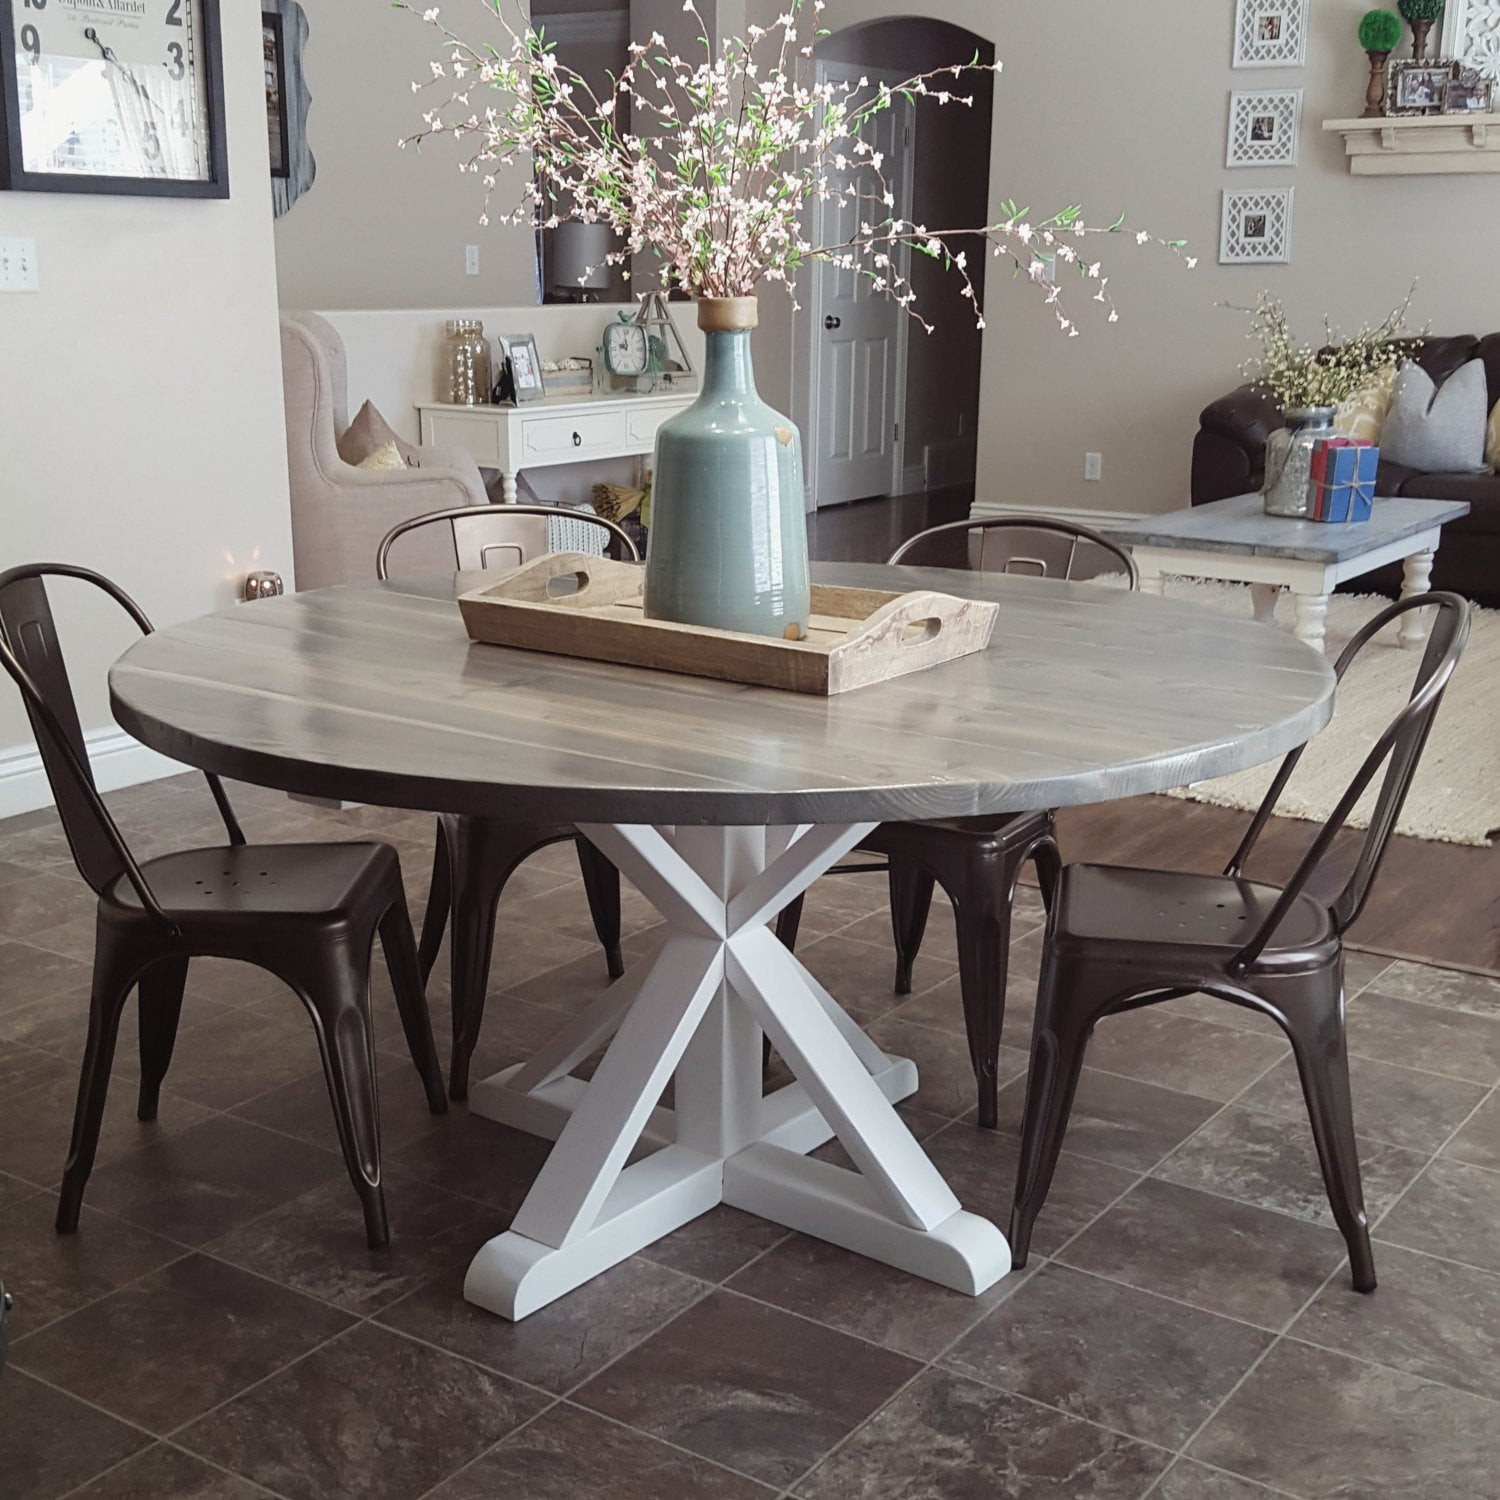 Rustic Round Kitchen Table
 rustic handmade round farmhouse dinning table